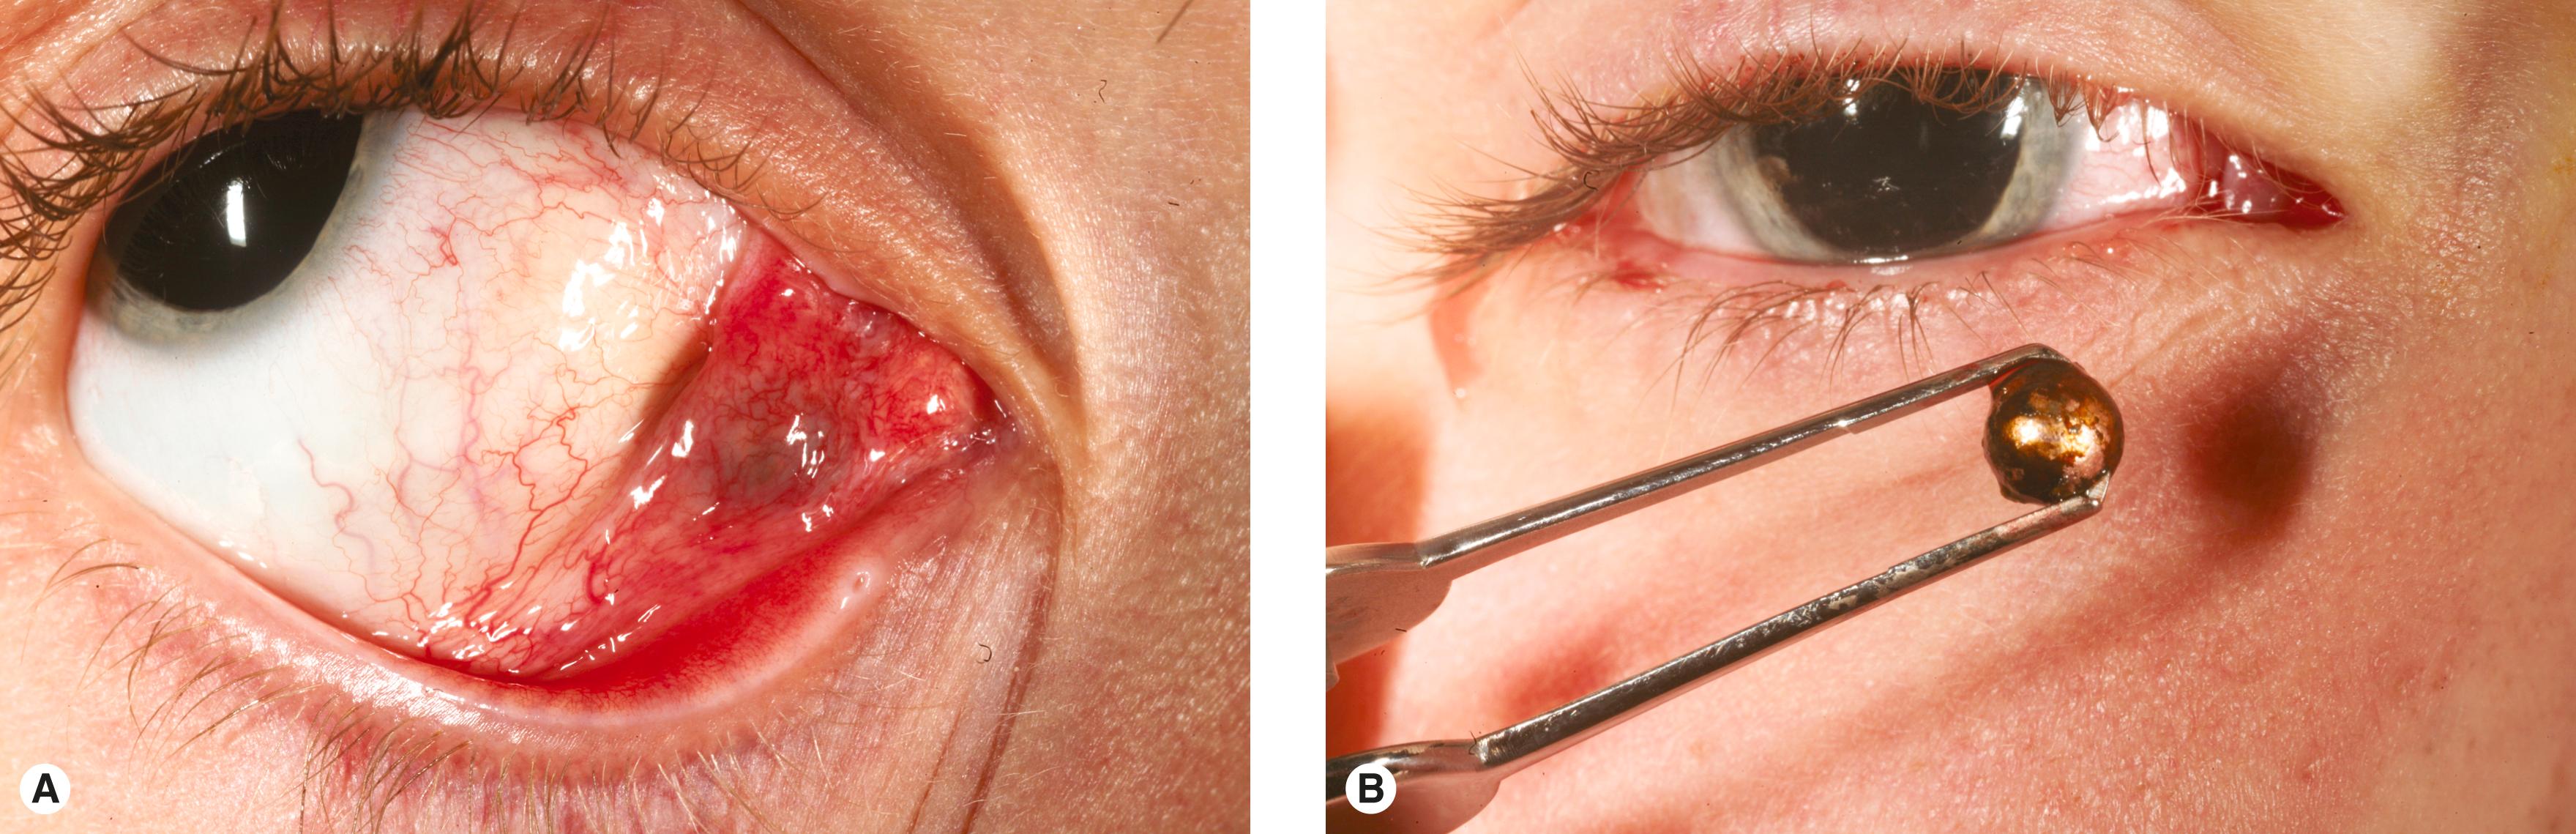 Figure 13.3, ( A ) Unusual conjunctival swelling in a 12-year-old boy with “no history” of trauma. ( B ) BB removed from conjunctiva. The boy later disclosed that he and a friend were playing with BB guns!